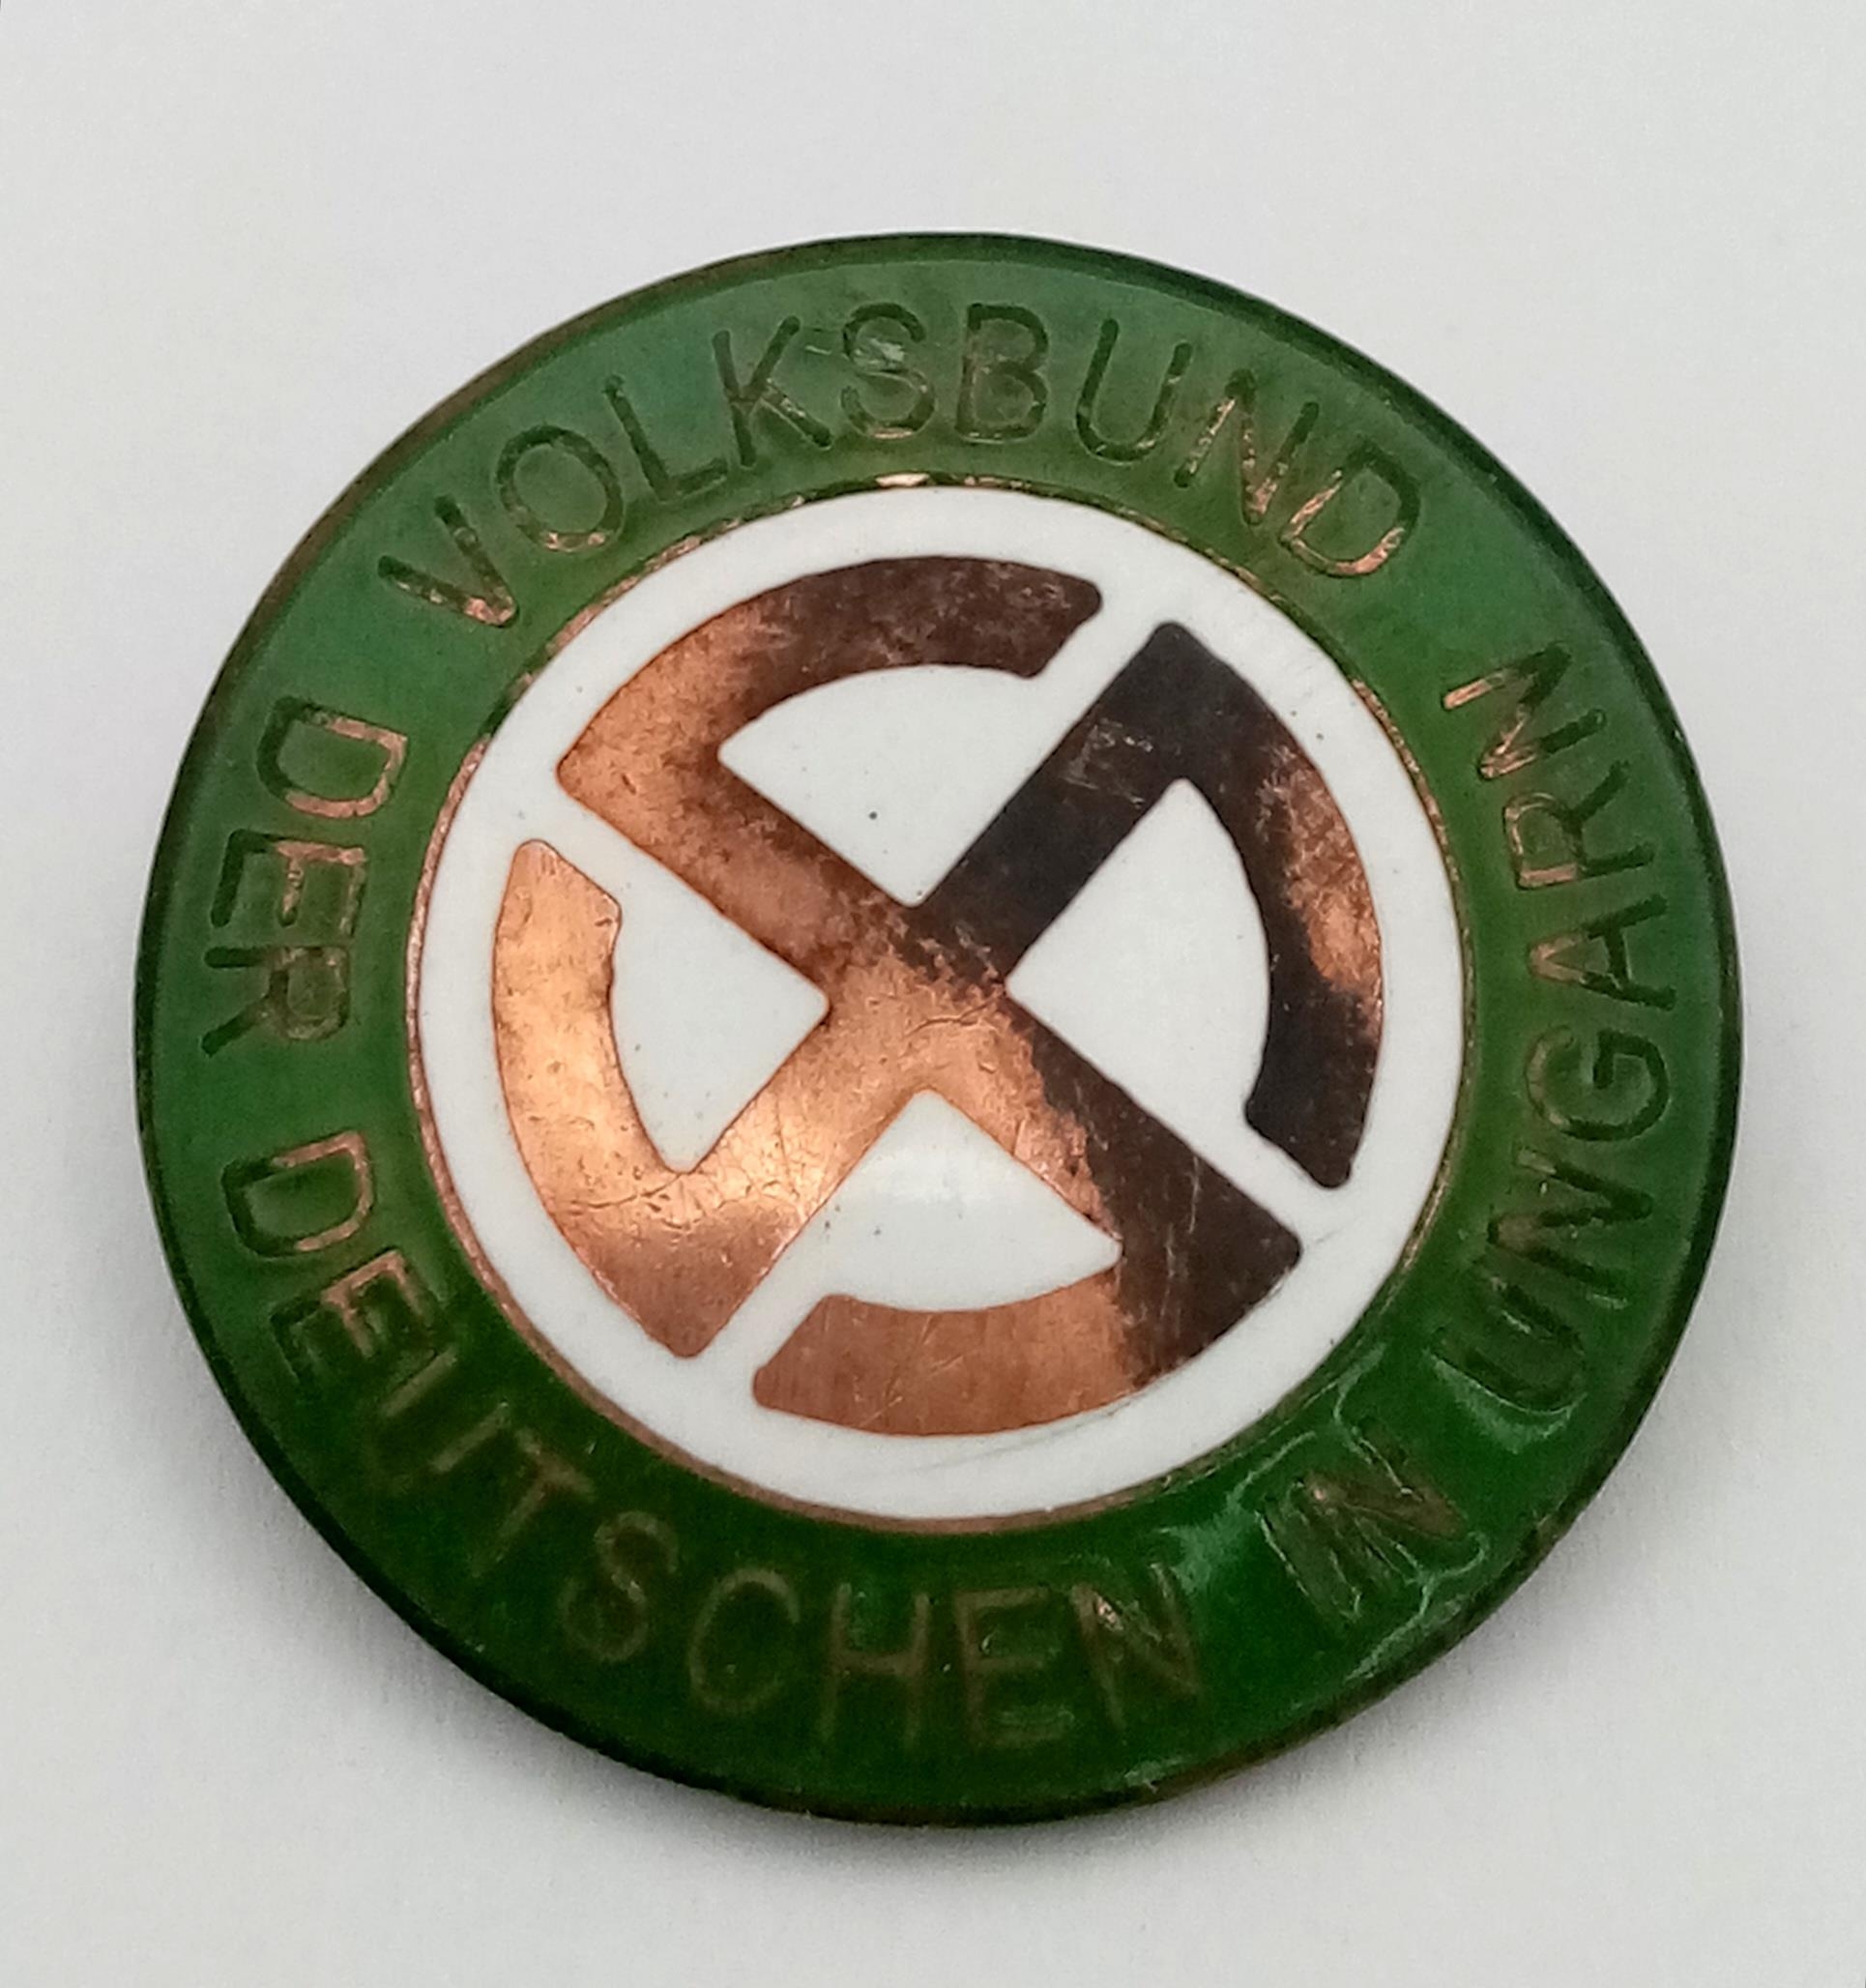 3rd Reich League of German People in Hungary Lapel Pin.